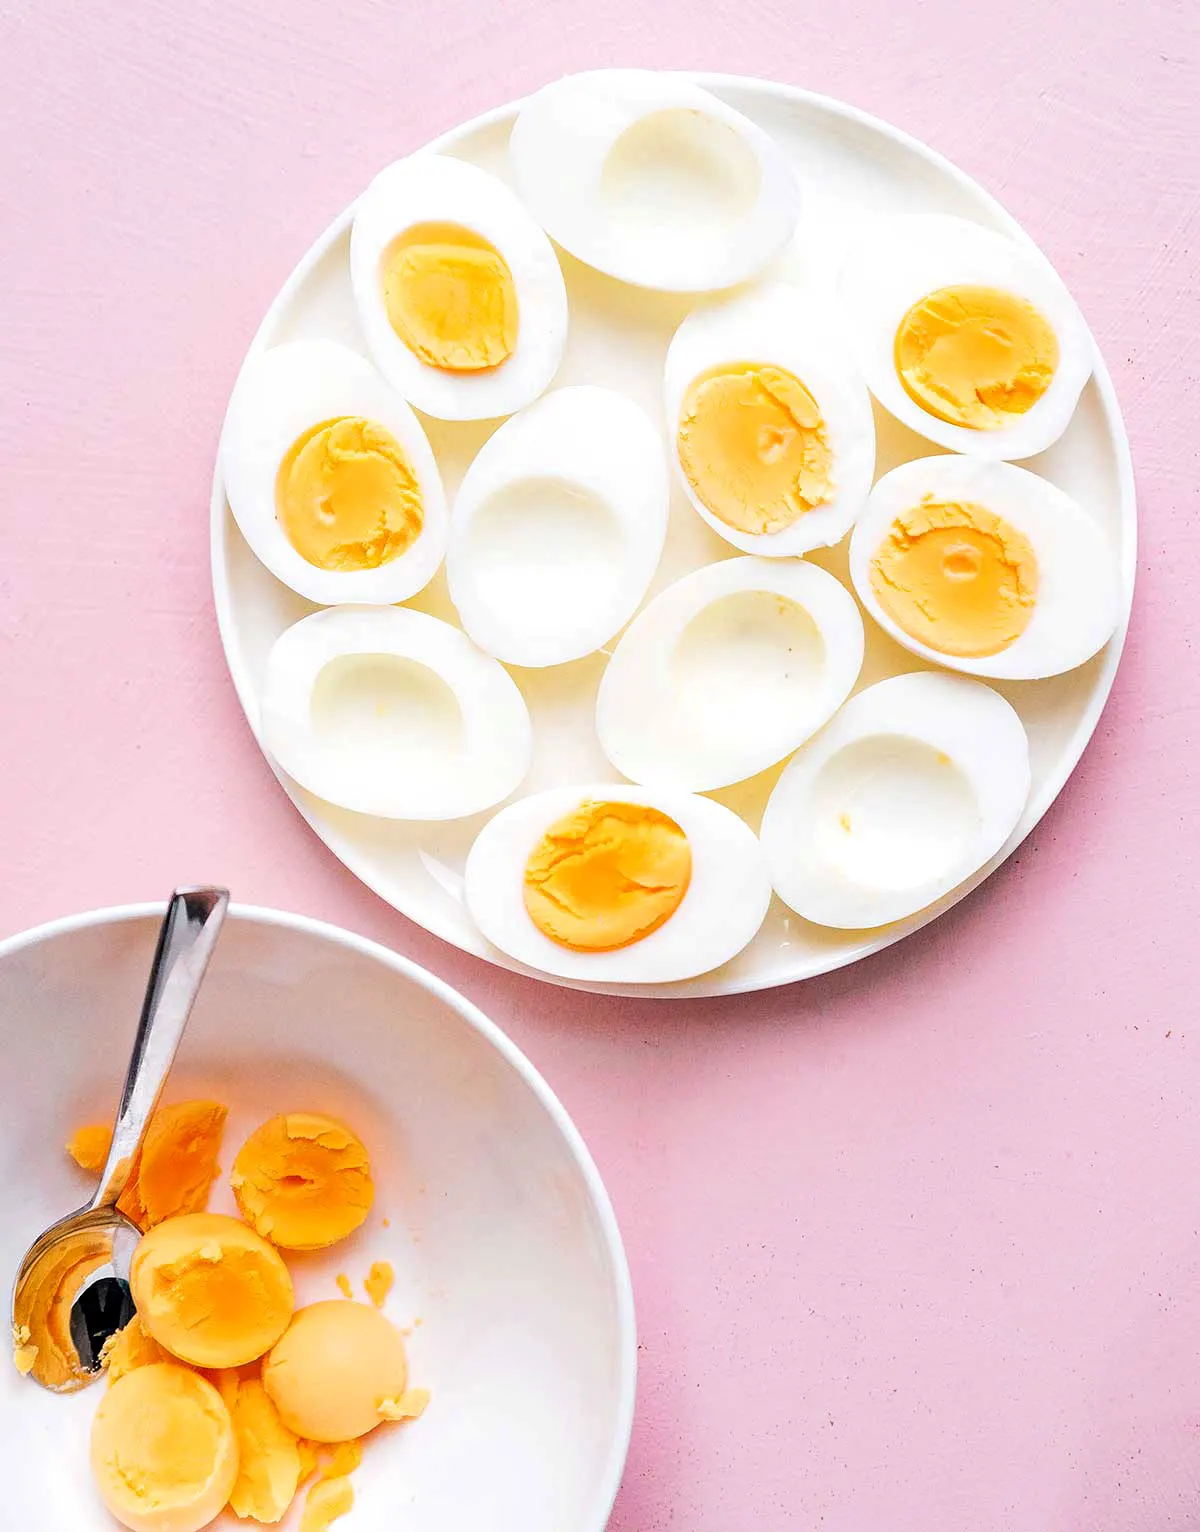 A plate of hardboiled eggs on a pink background